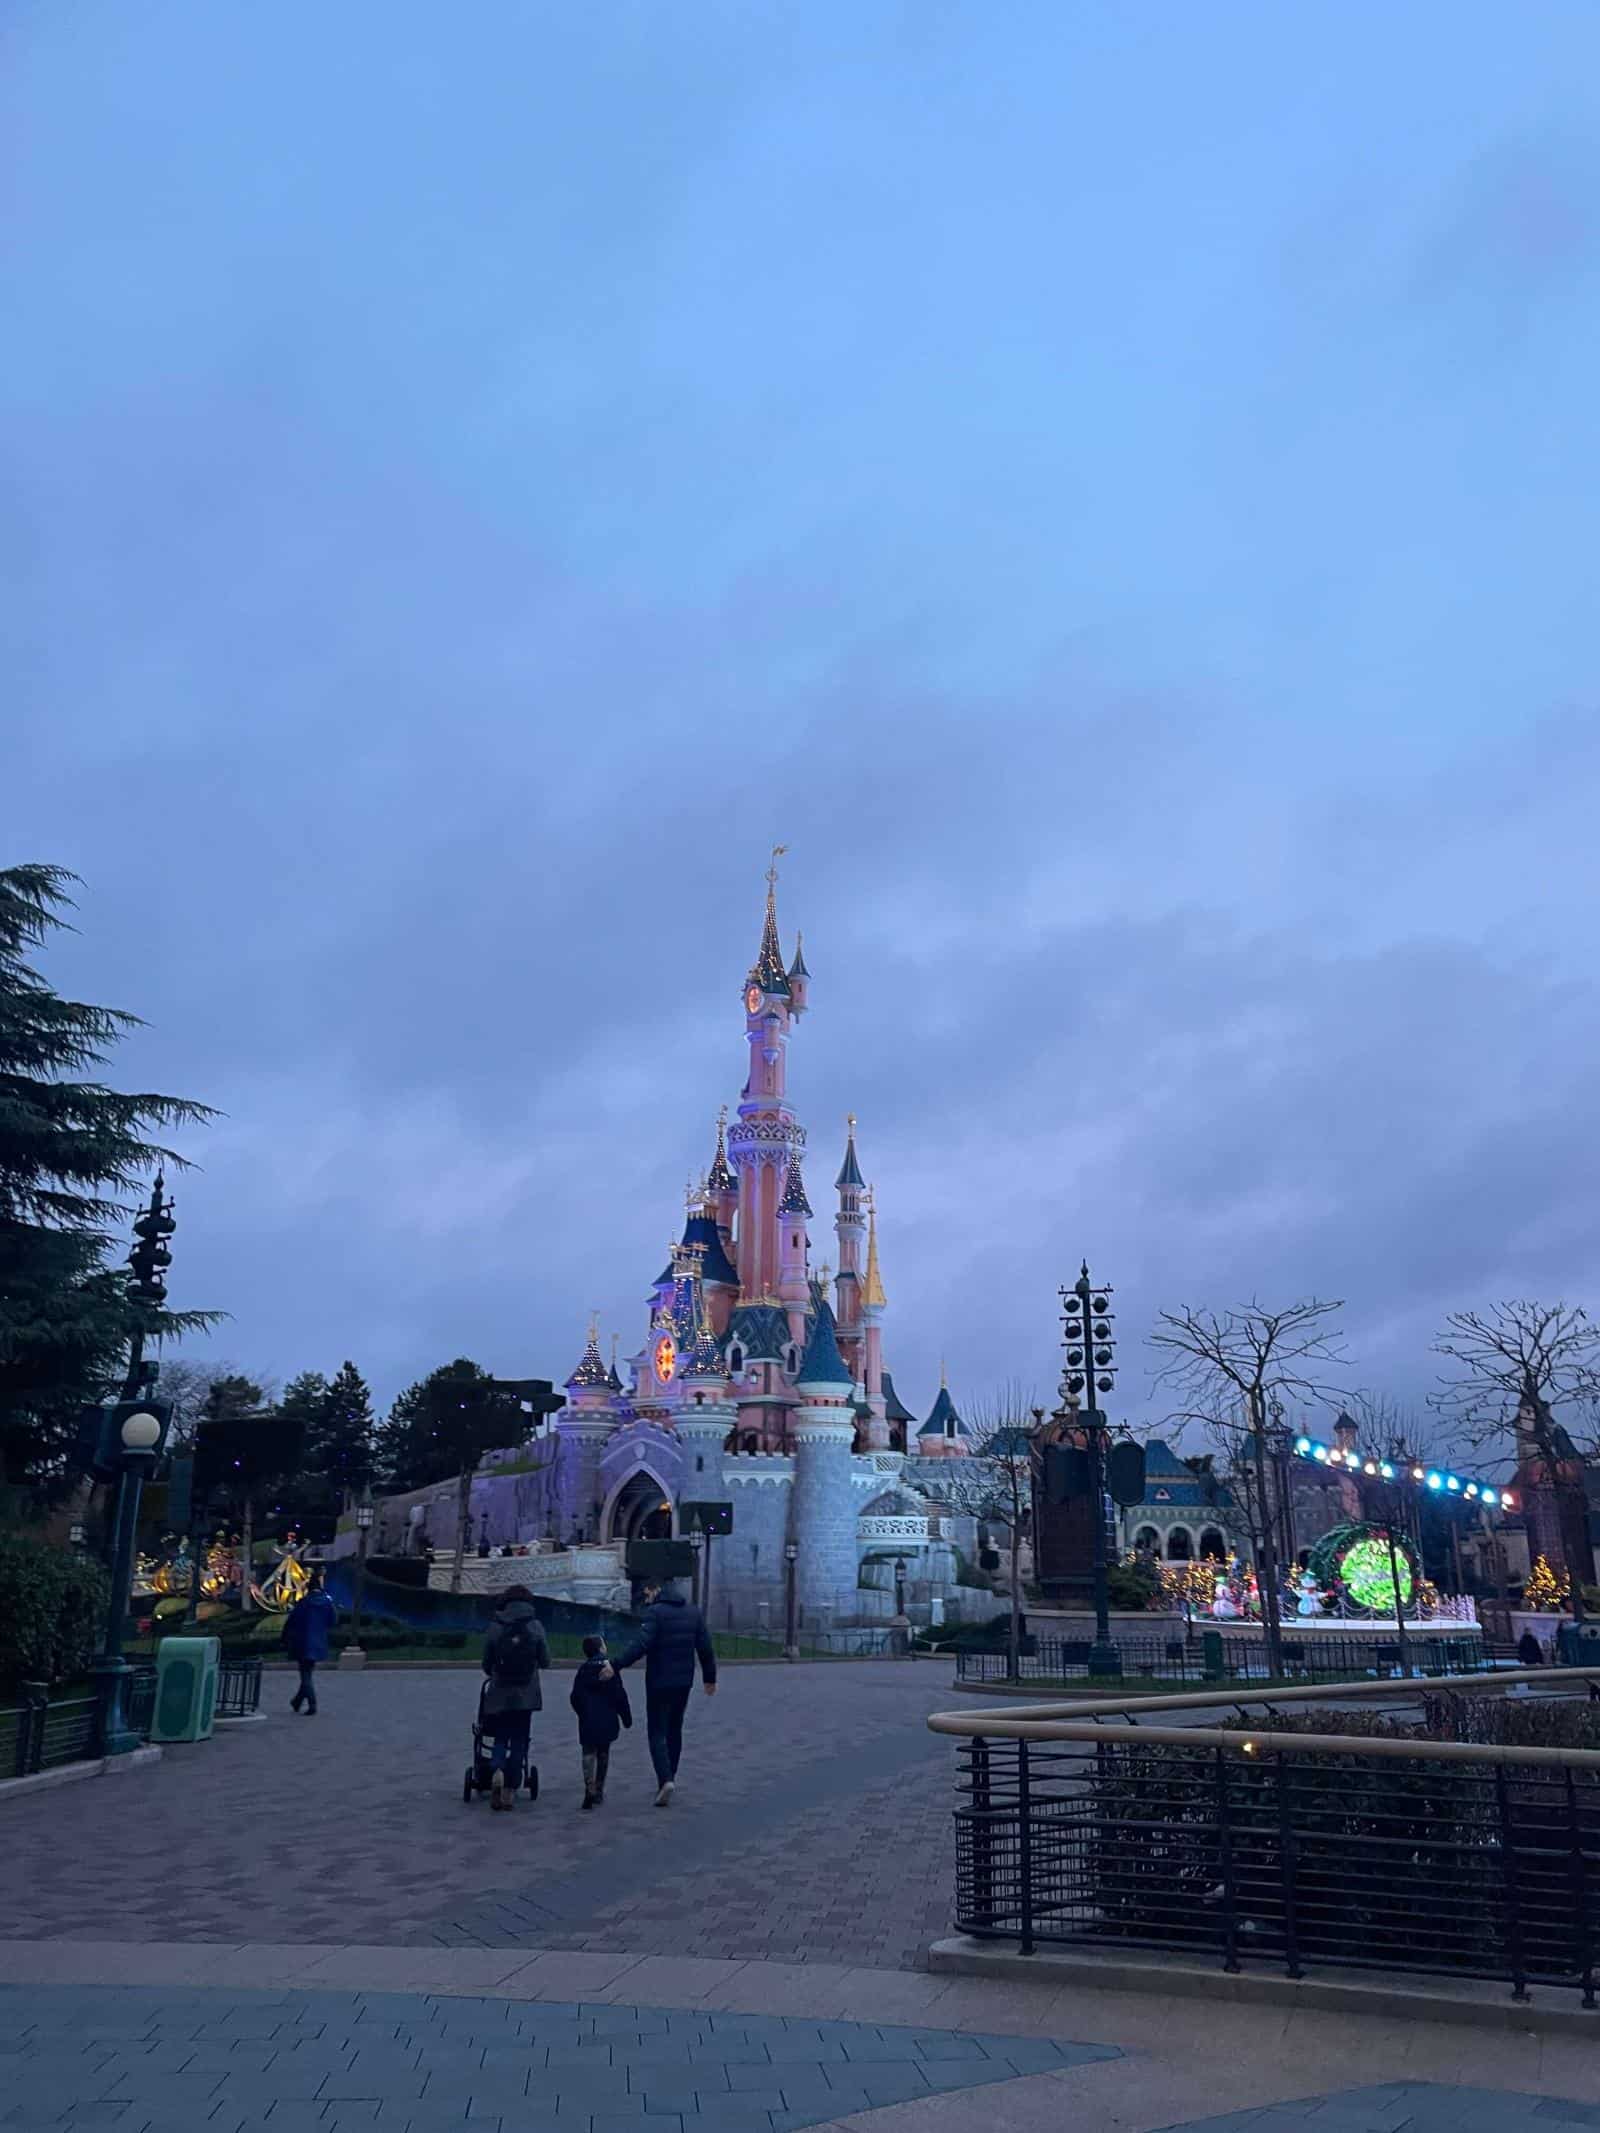 View of the castle at Disneyland Paris during Early Magic Hours